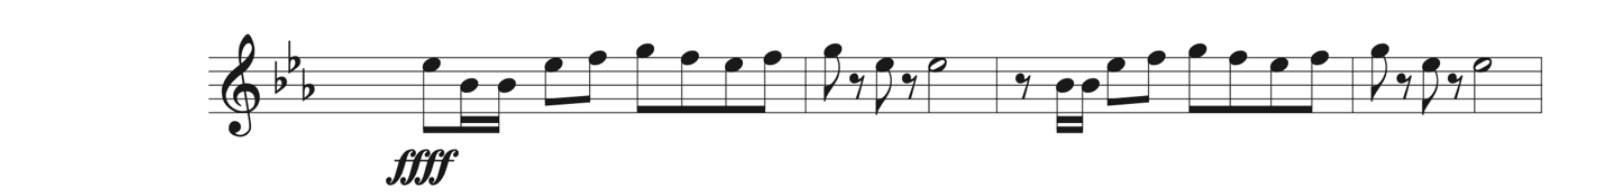 Tchaikovsky, 1812 Overture. The first measure begins with an eighth note and two sixteenth notes beamed together, two eighth notes beamed together, and four eighth notes beamed together. Listen to the sound clip below.